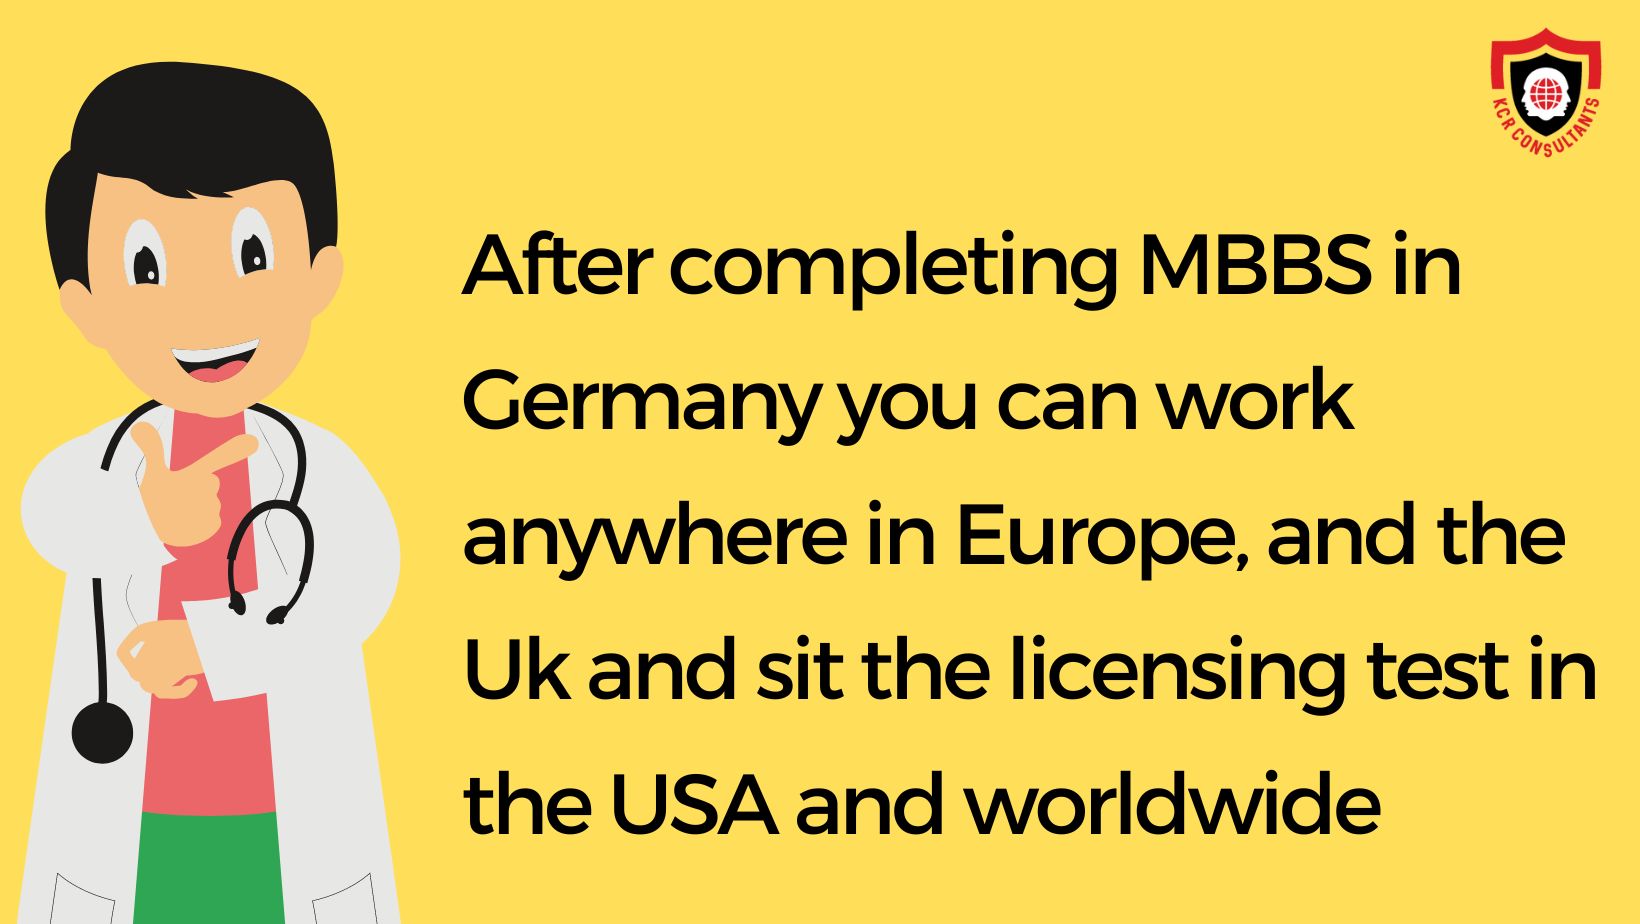 Study MBBS in Germany - After MBBS